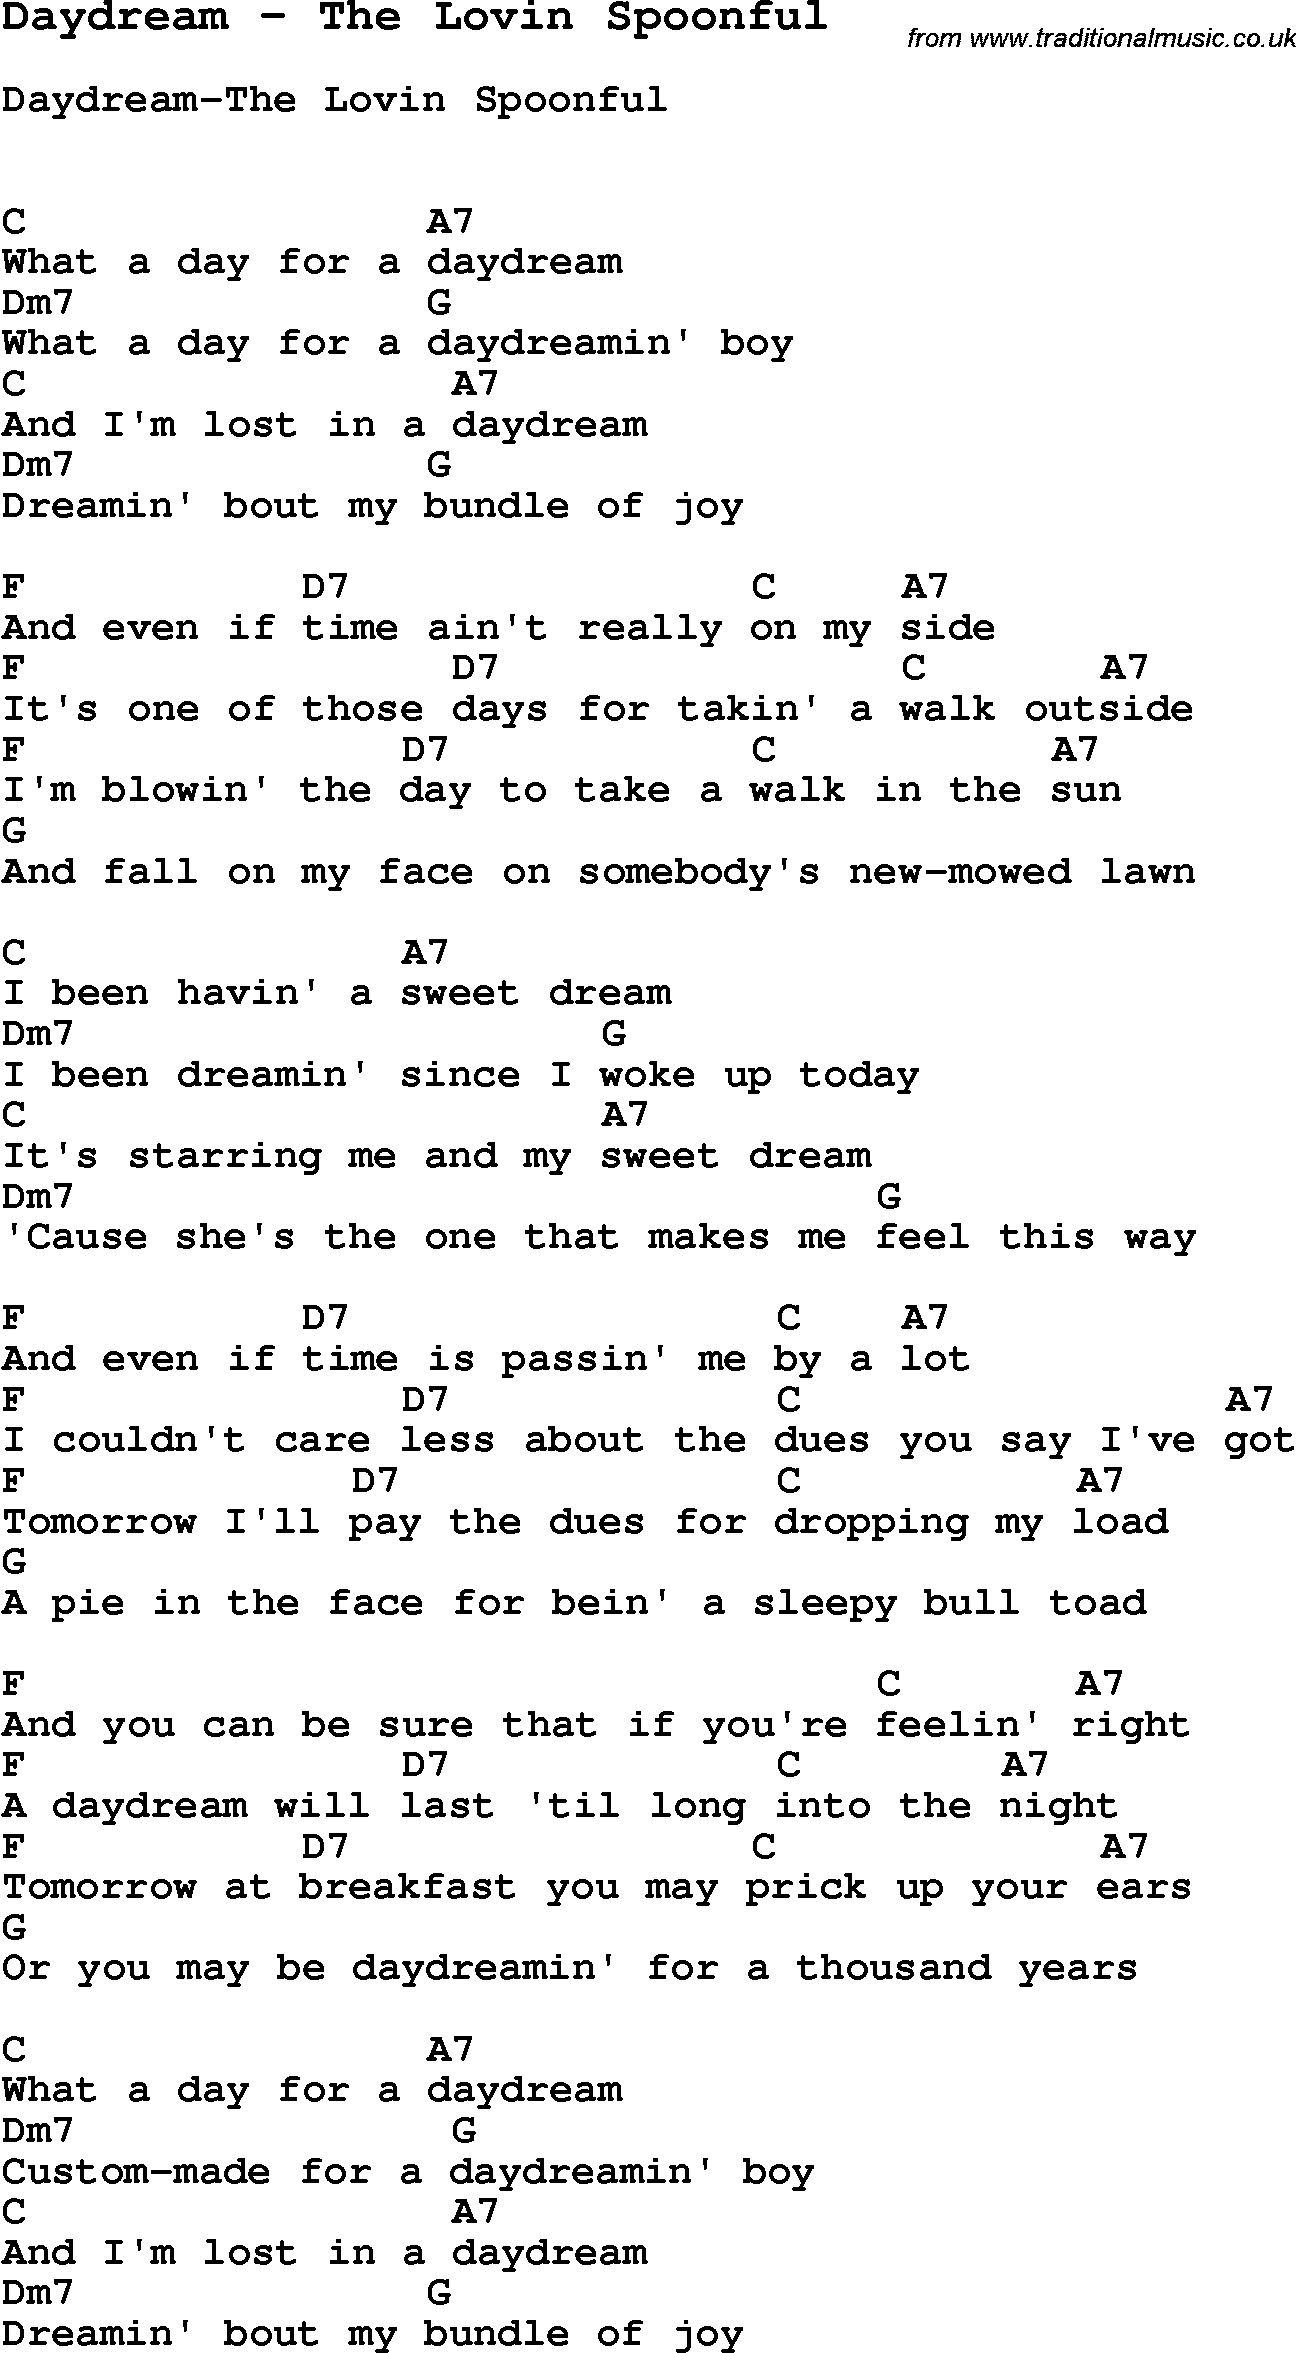 Song Daydream by The Lovin Spoonful, with lyrics for vocal performance and accompaniment chords for Ukulele, Guitar Banjo etc.